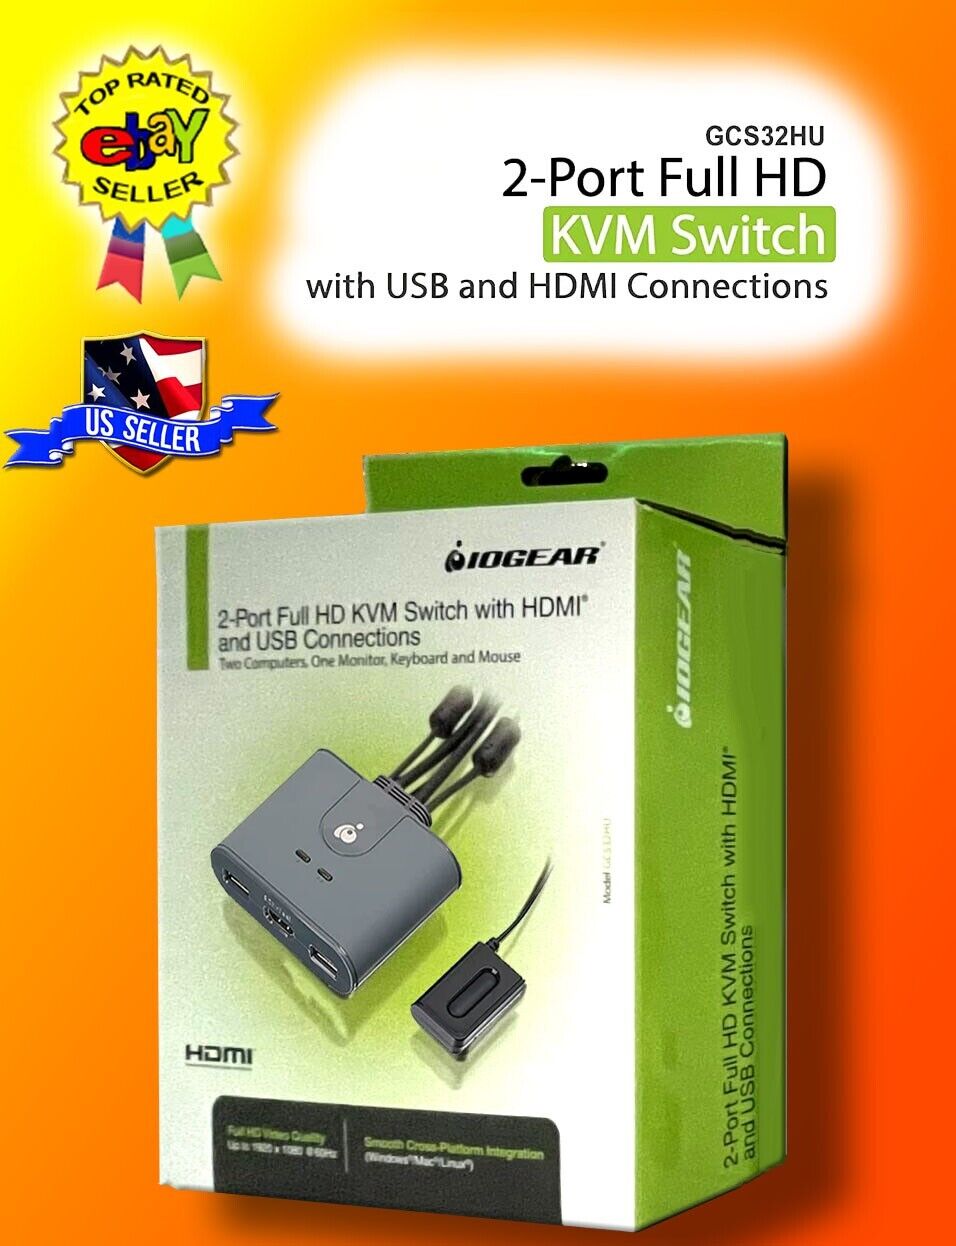 IOGEAR 2-Port Full HD KVM Switch with HDMI and USB Connections GCS32HU